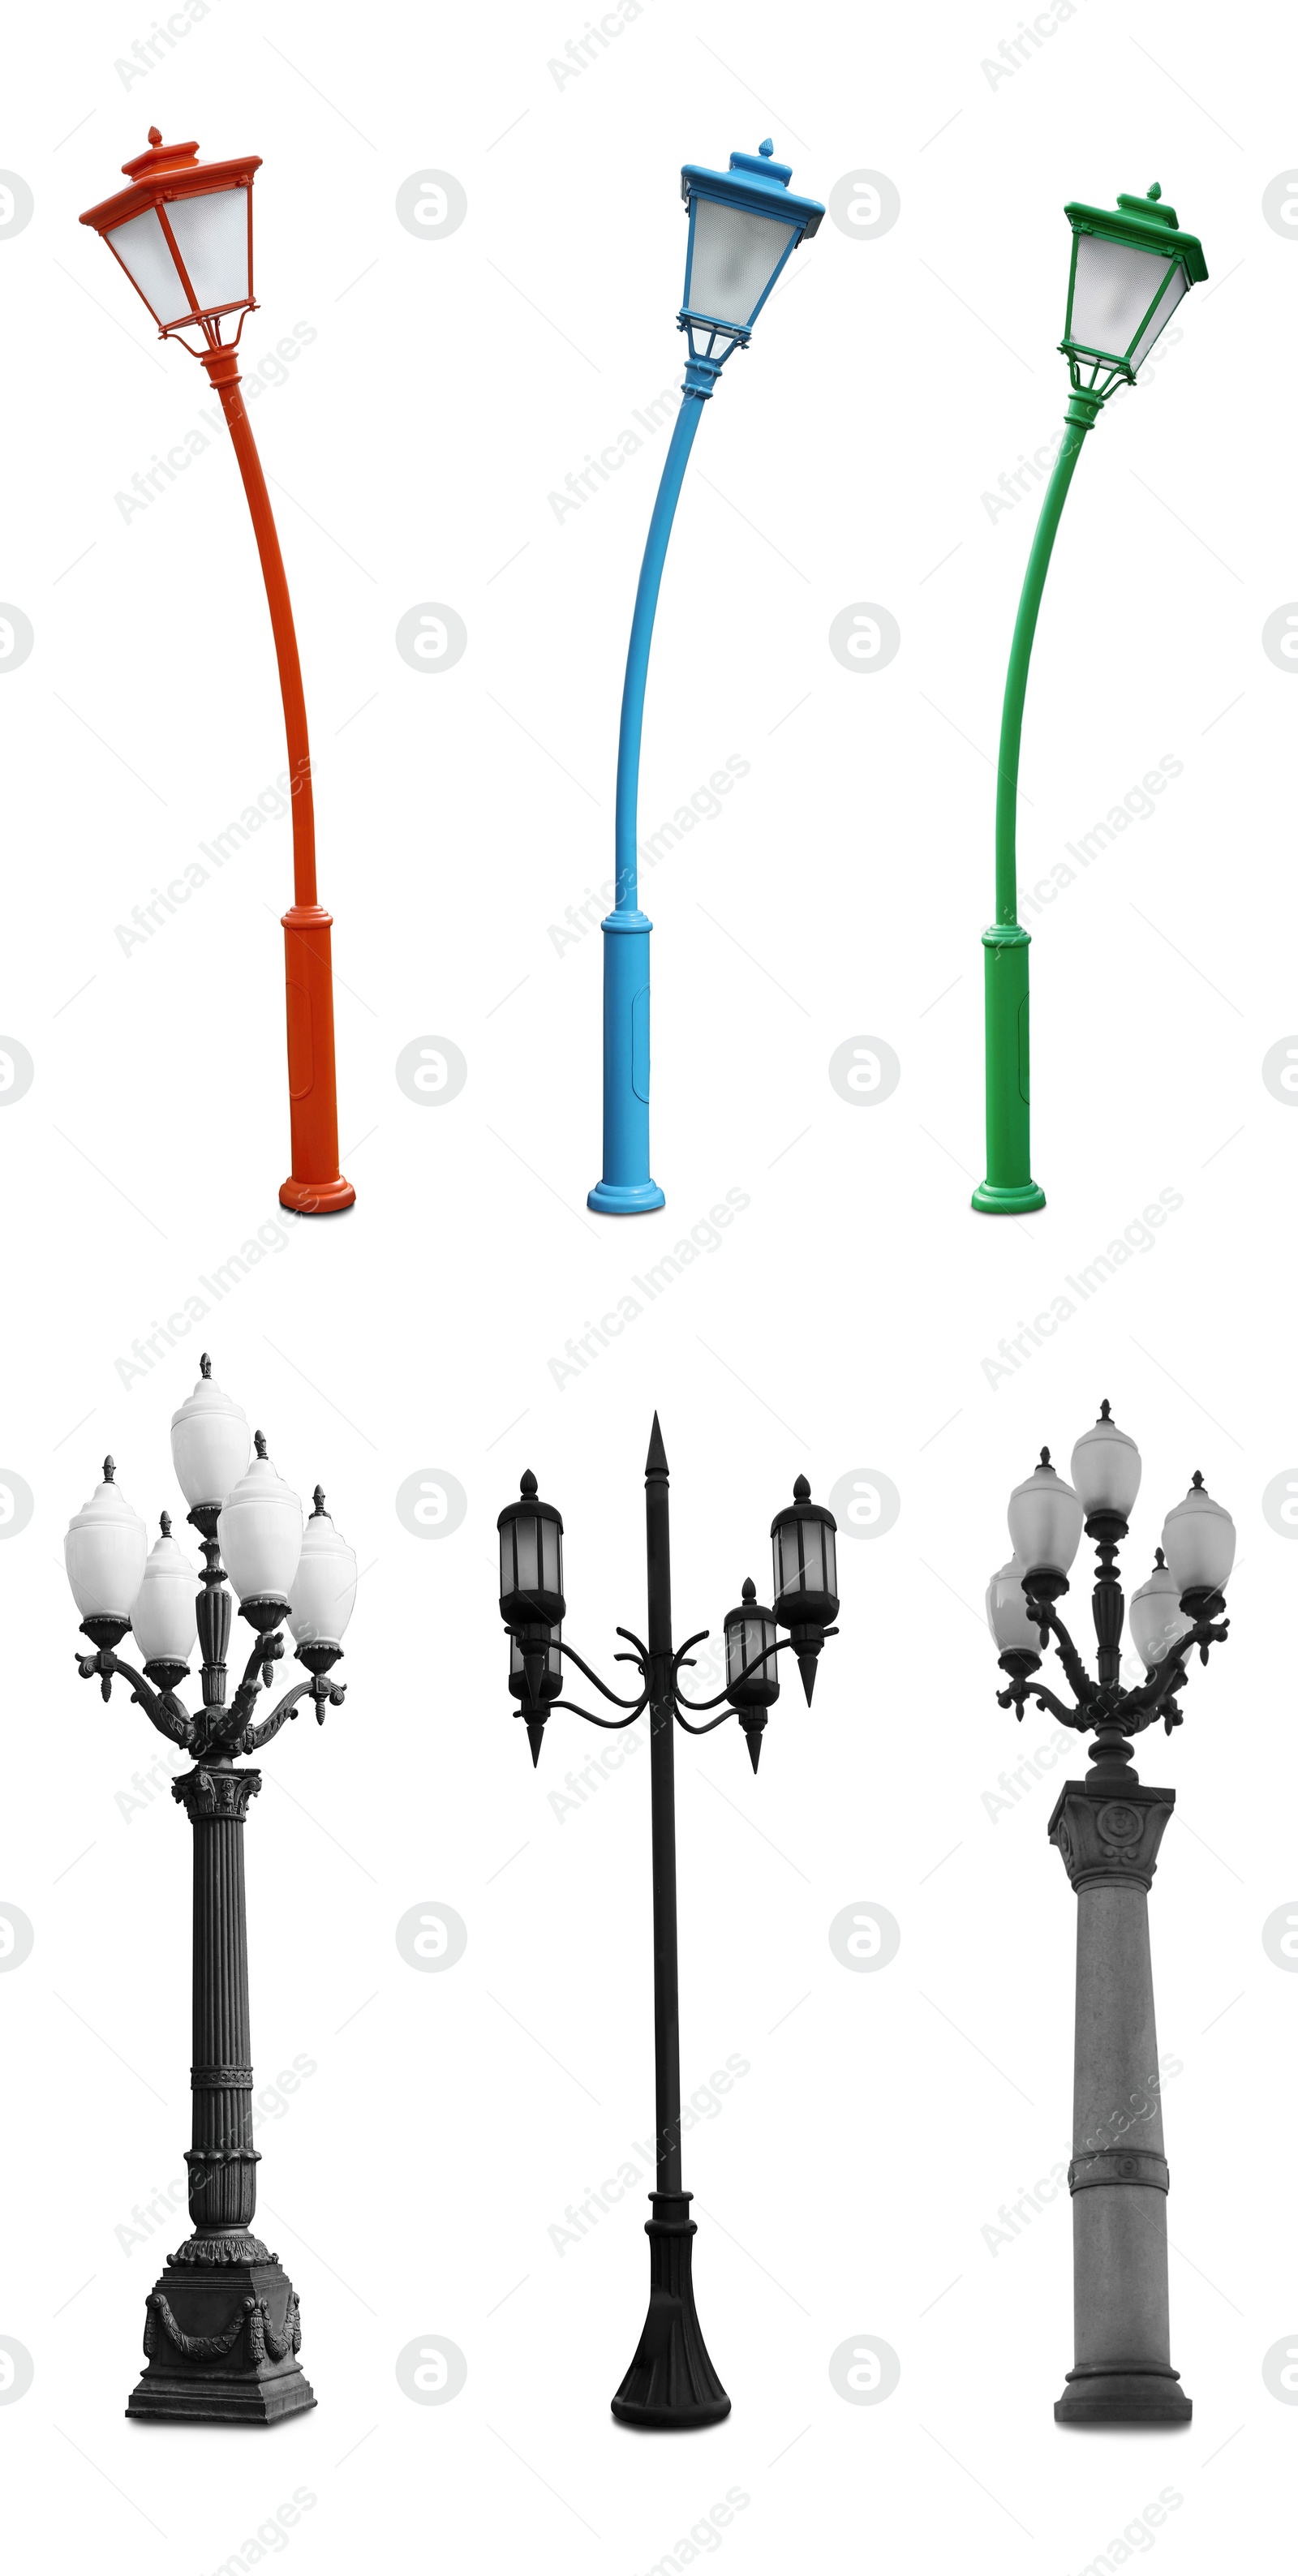 Image of Beautiful street lamps on white background, collage